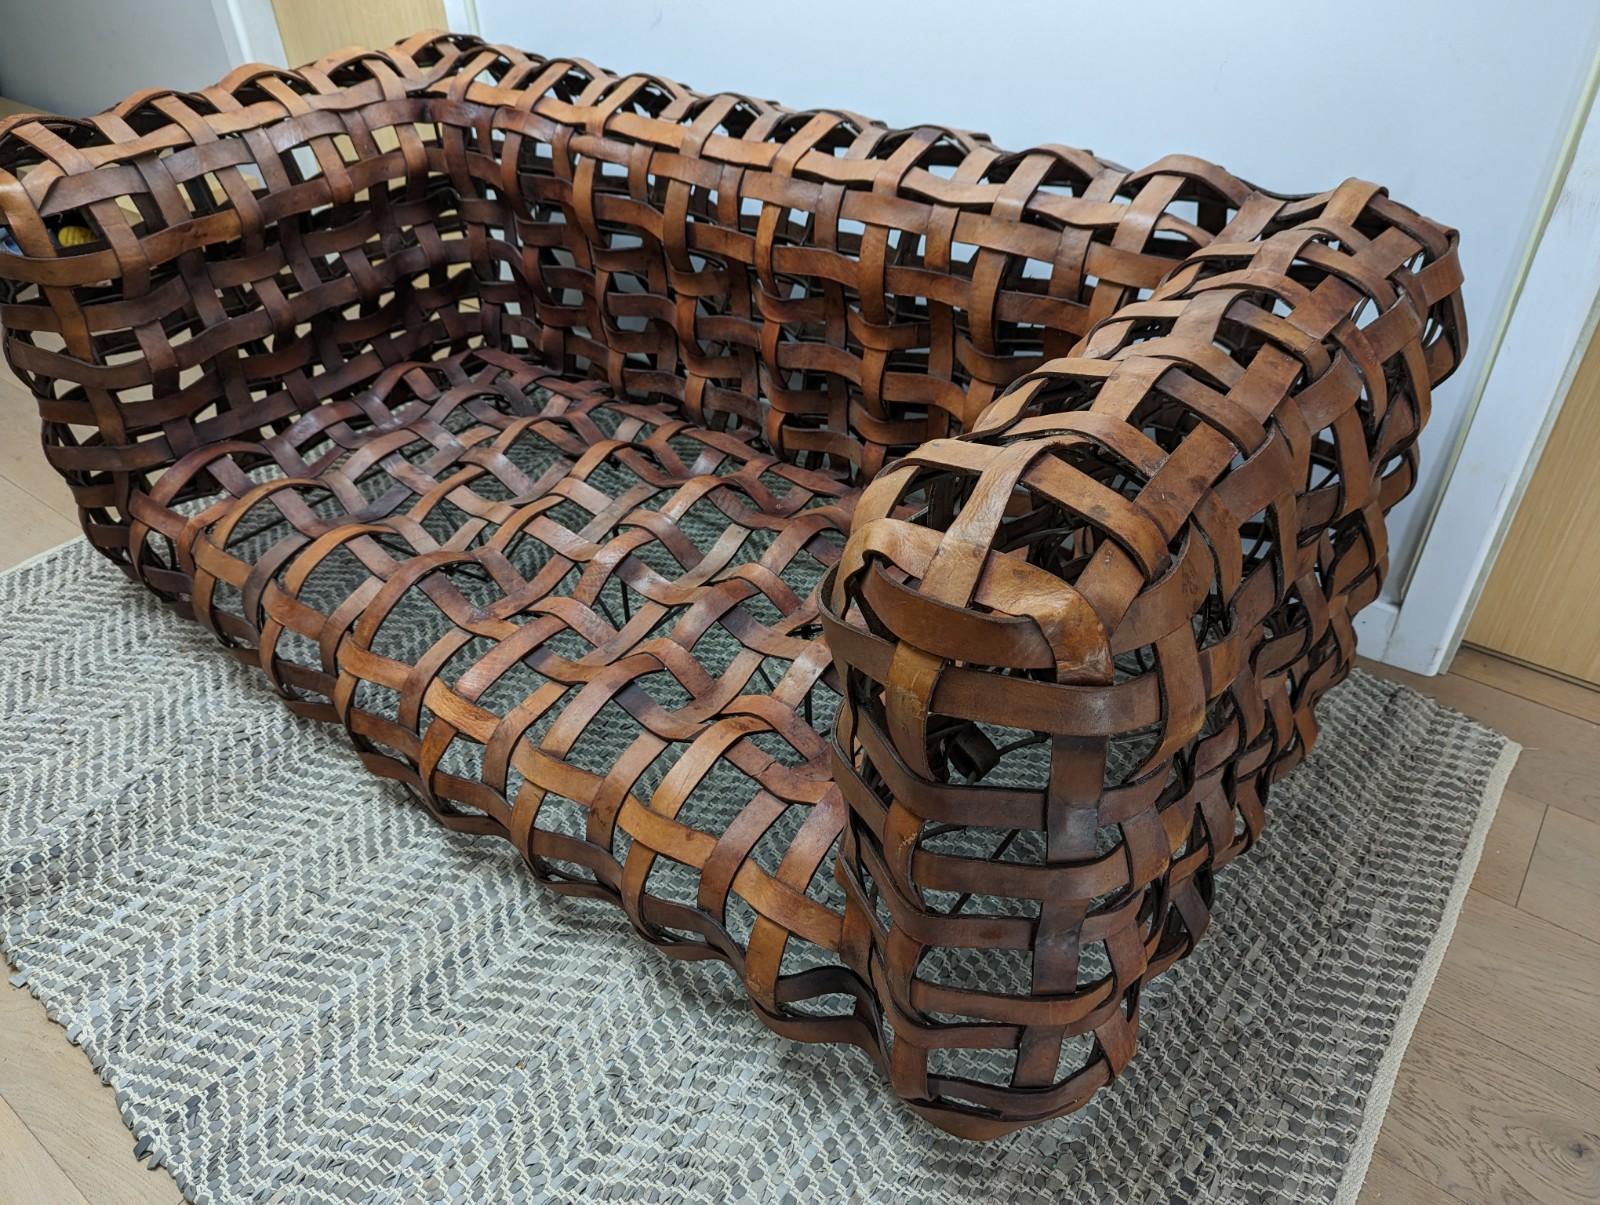 A unique vintage 2 person brown leather strap sofa.

The leather straps are connected to a metal welded frame which produces this highly unusual sofa.

The sofa has recently been rewelded and more support added underneath

The sofa would need